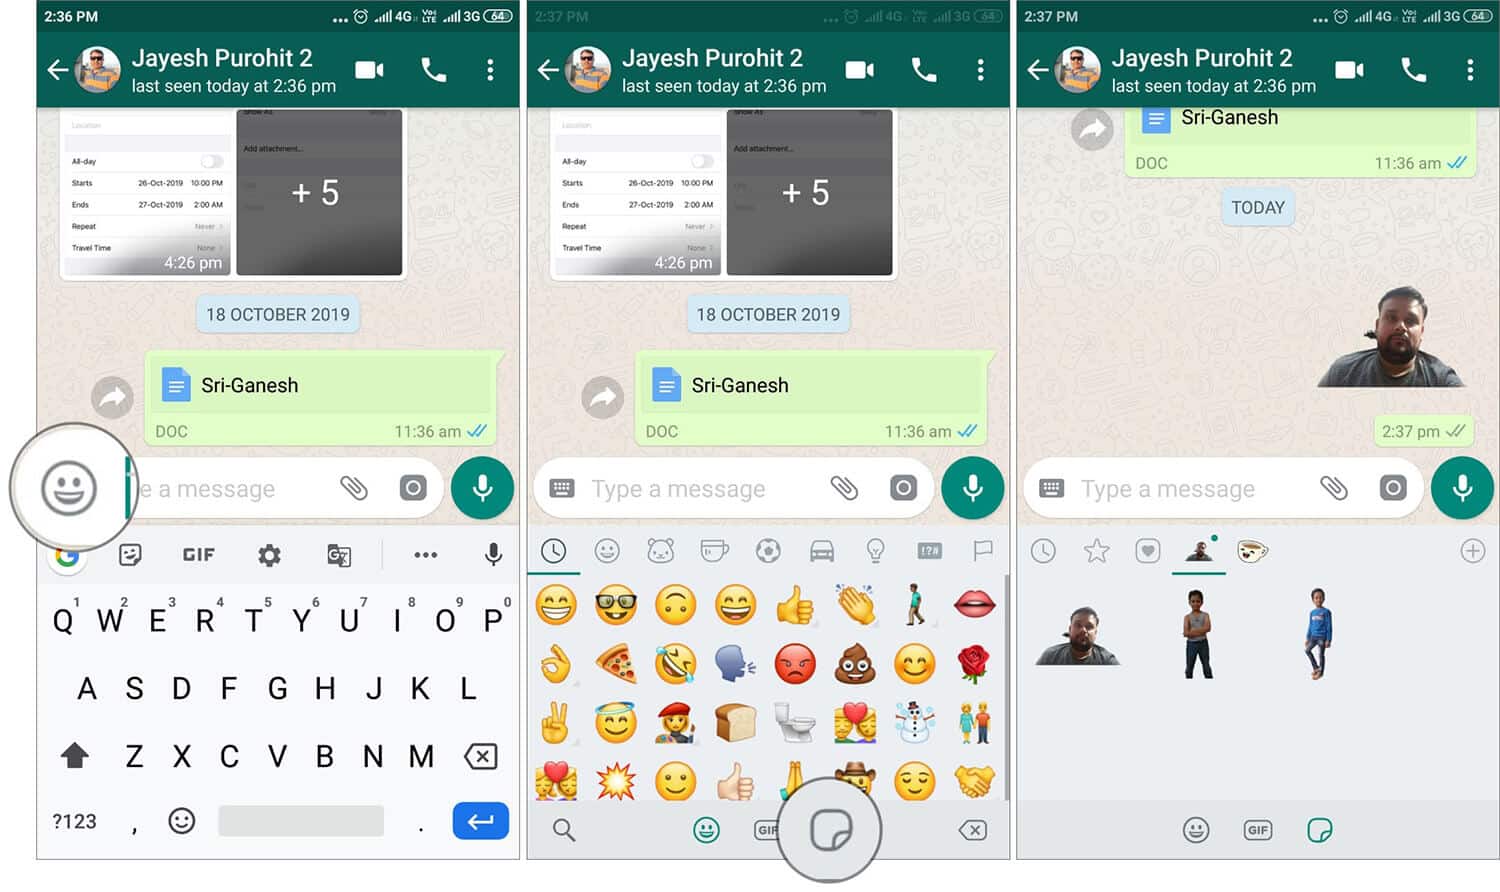 Send custom stickers on WhatsApp from Android Phone